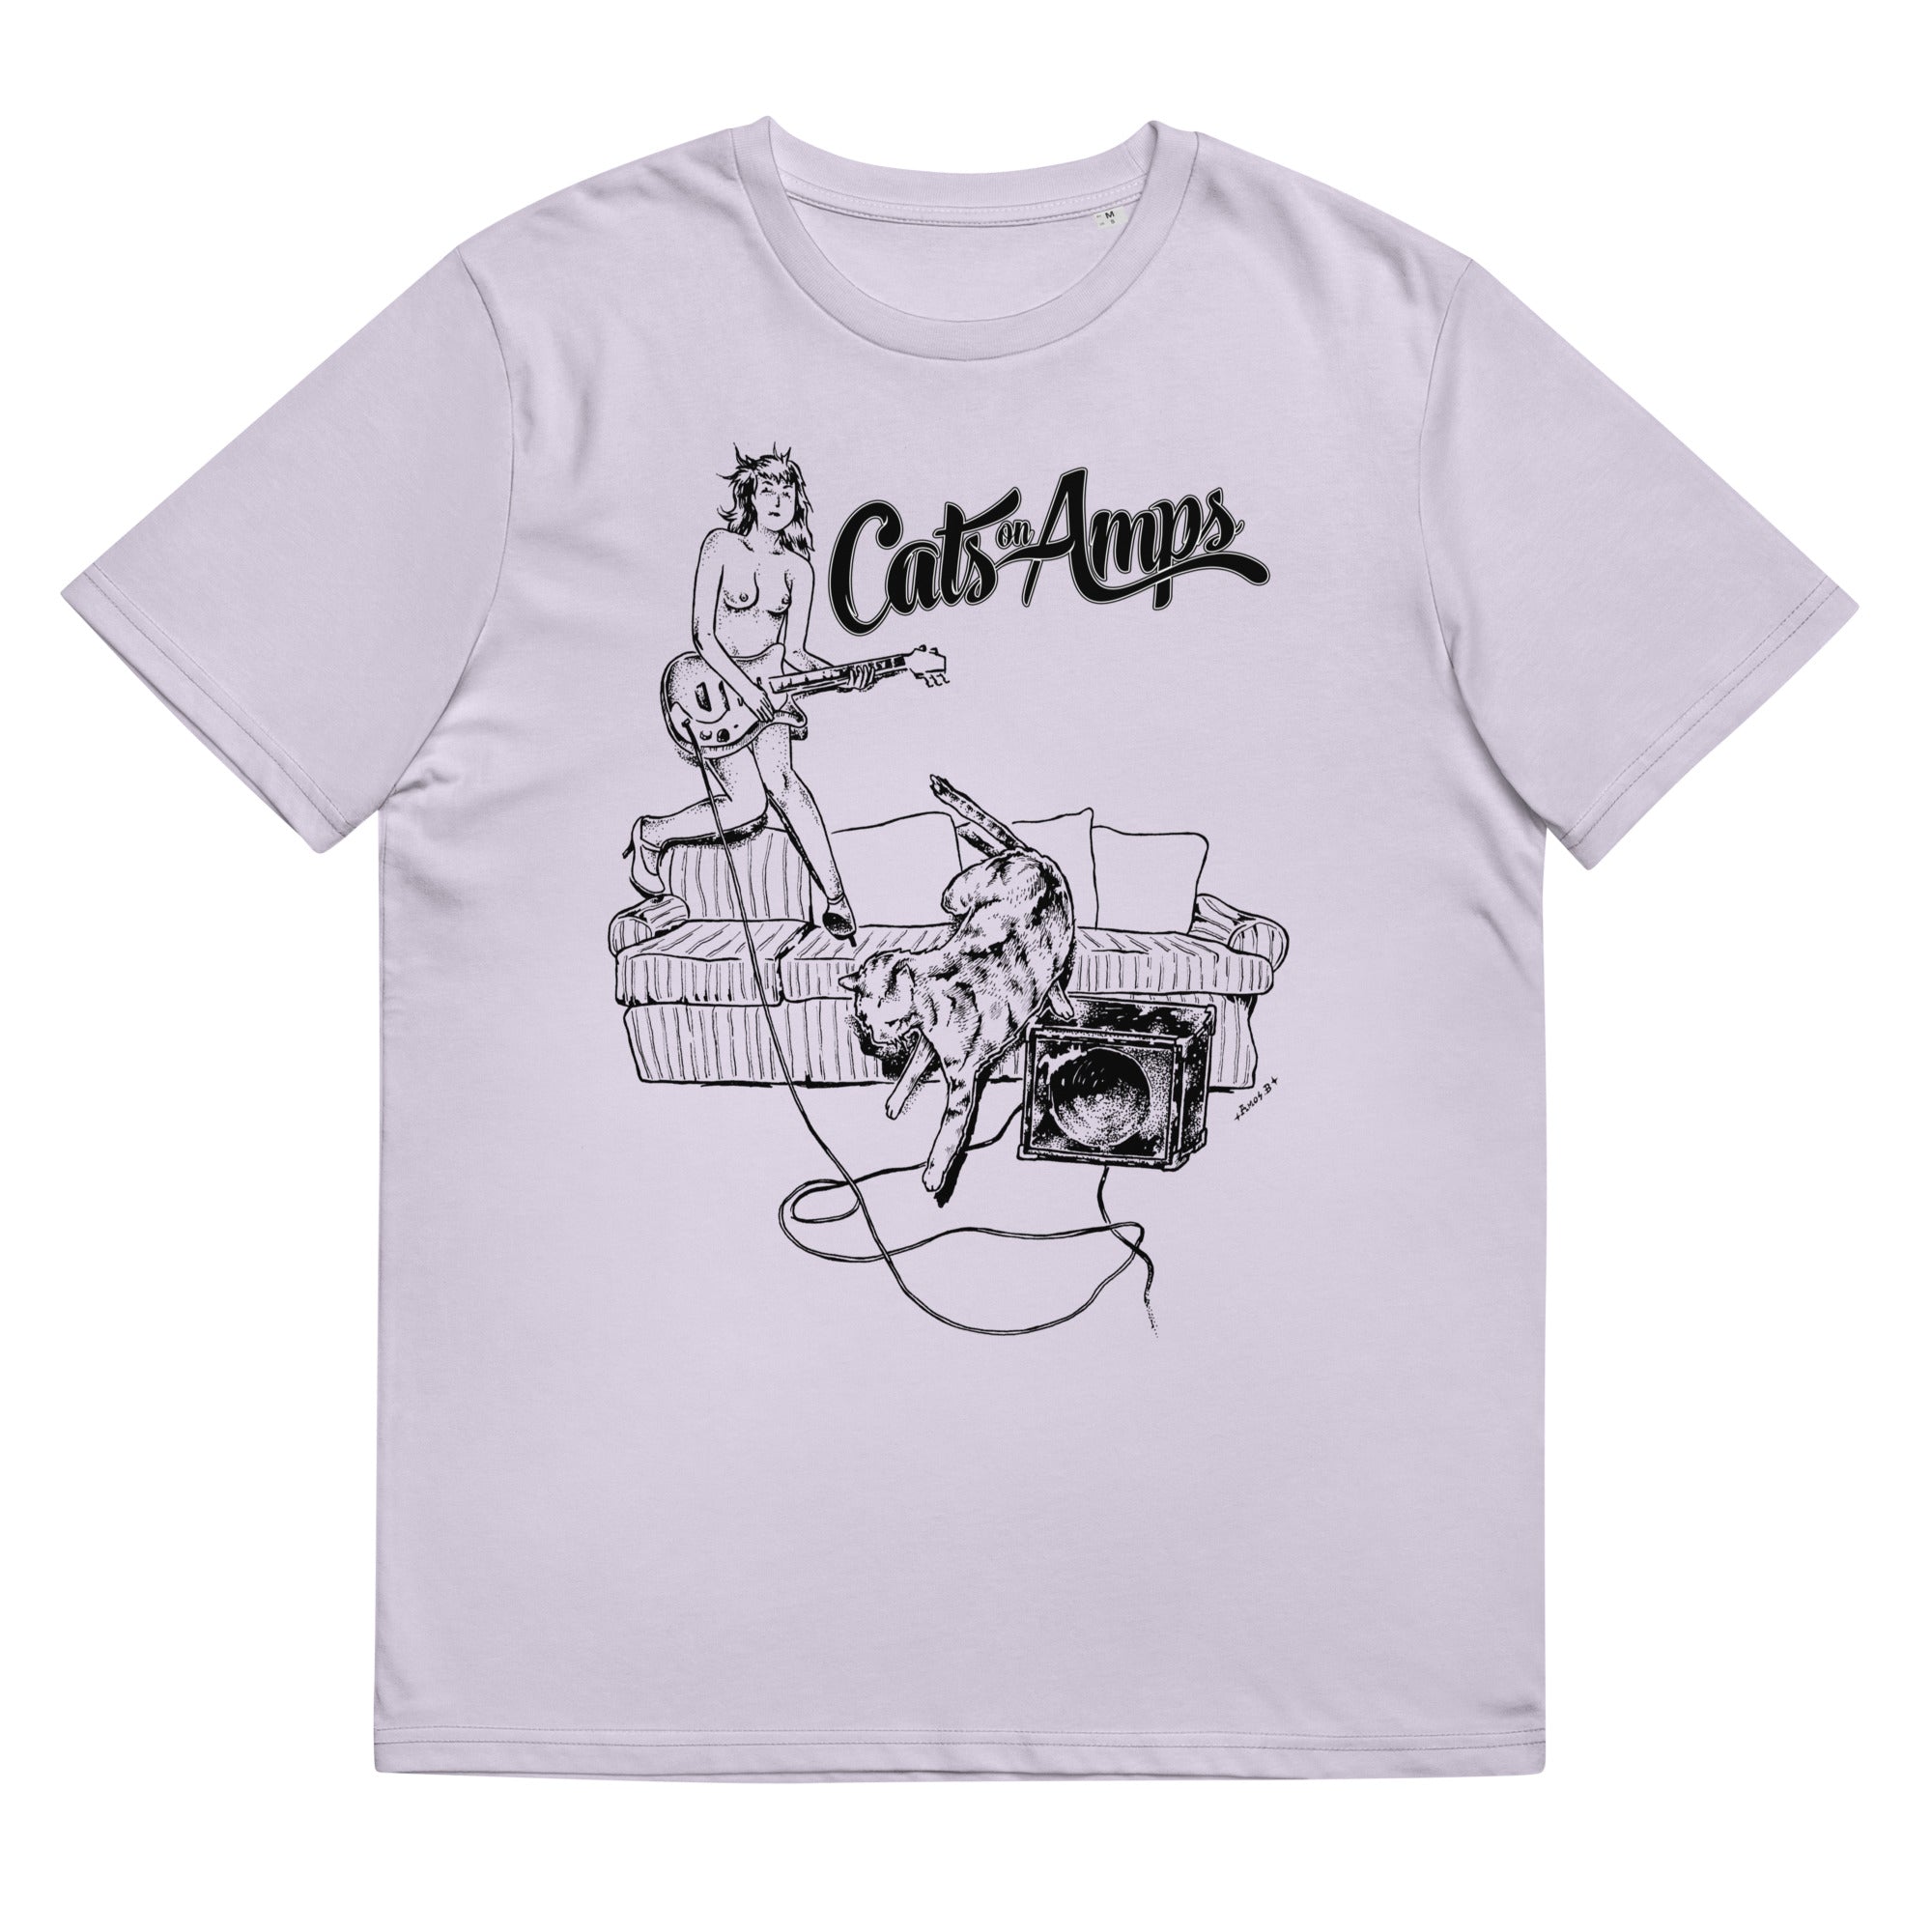 CATS ON AMPS - Chick on Amps - Unisex Organic Cotton T-Shirt